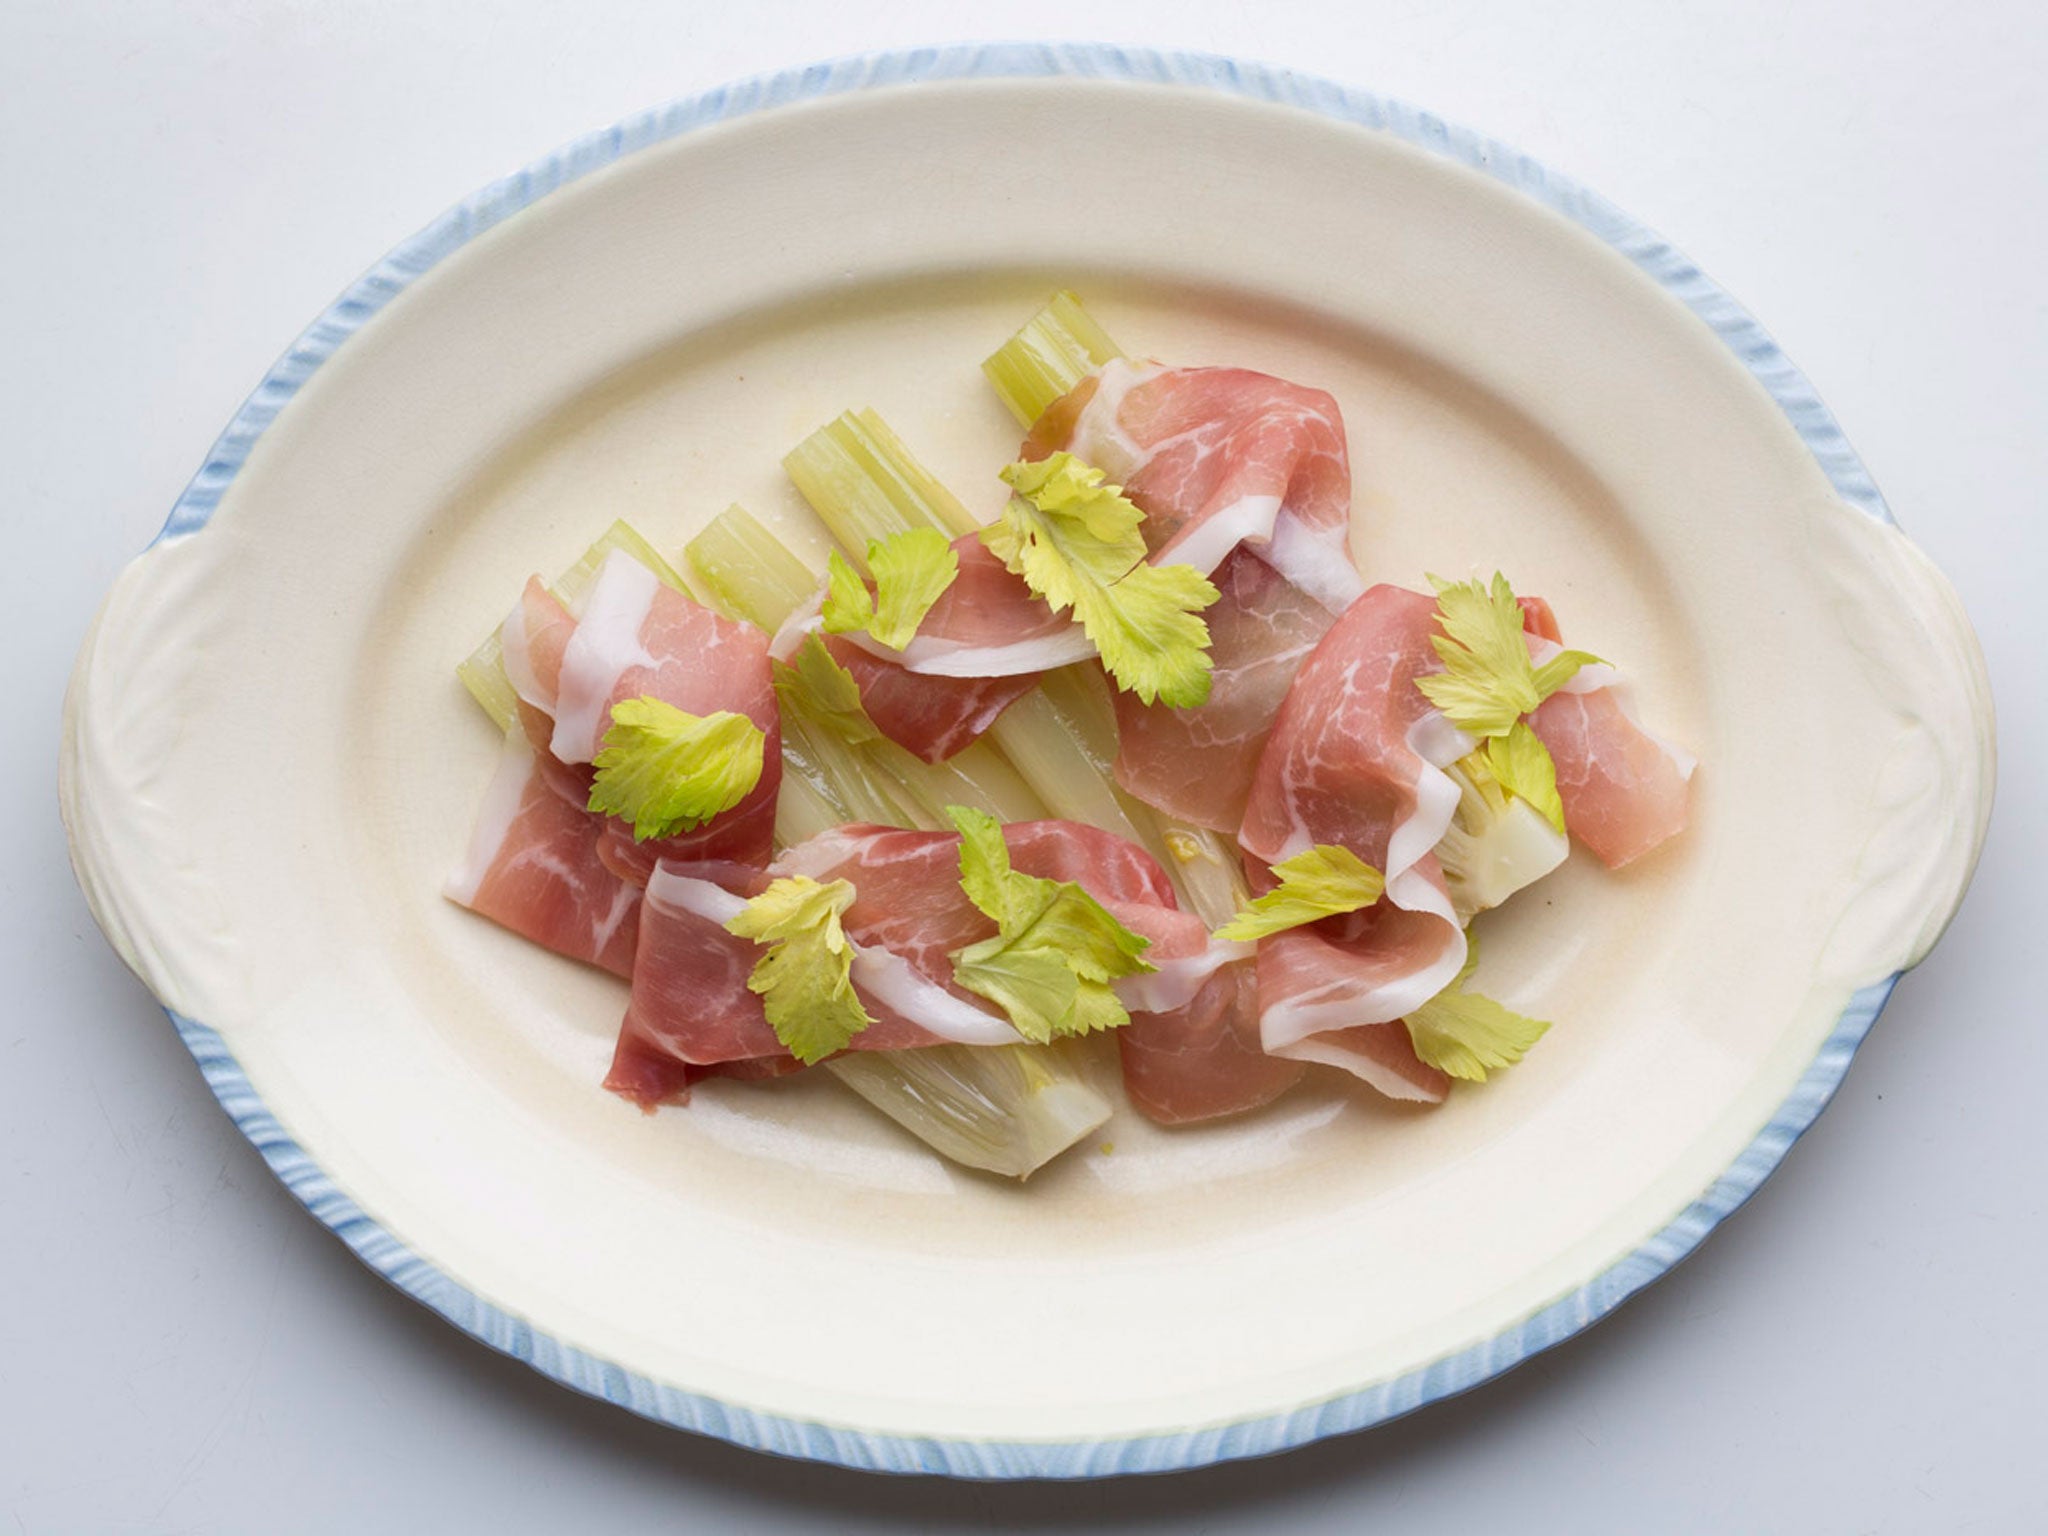 Celery hearts with air-dried Cumbrian ham